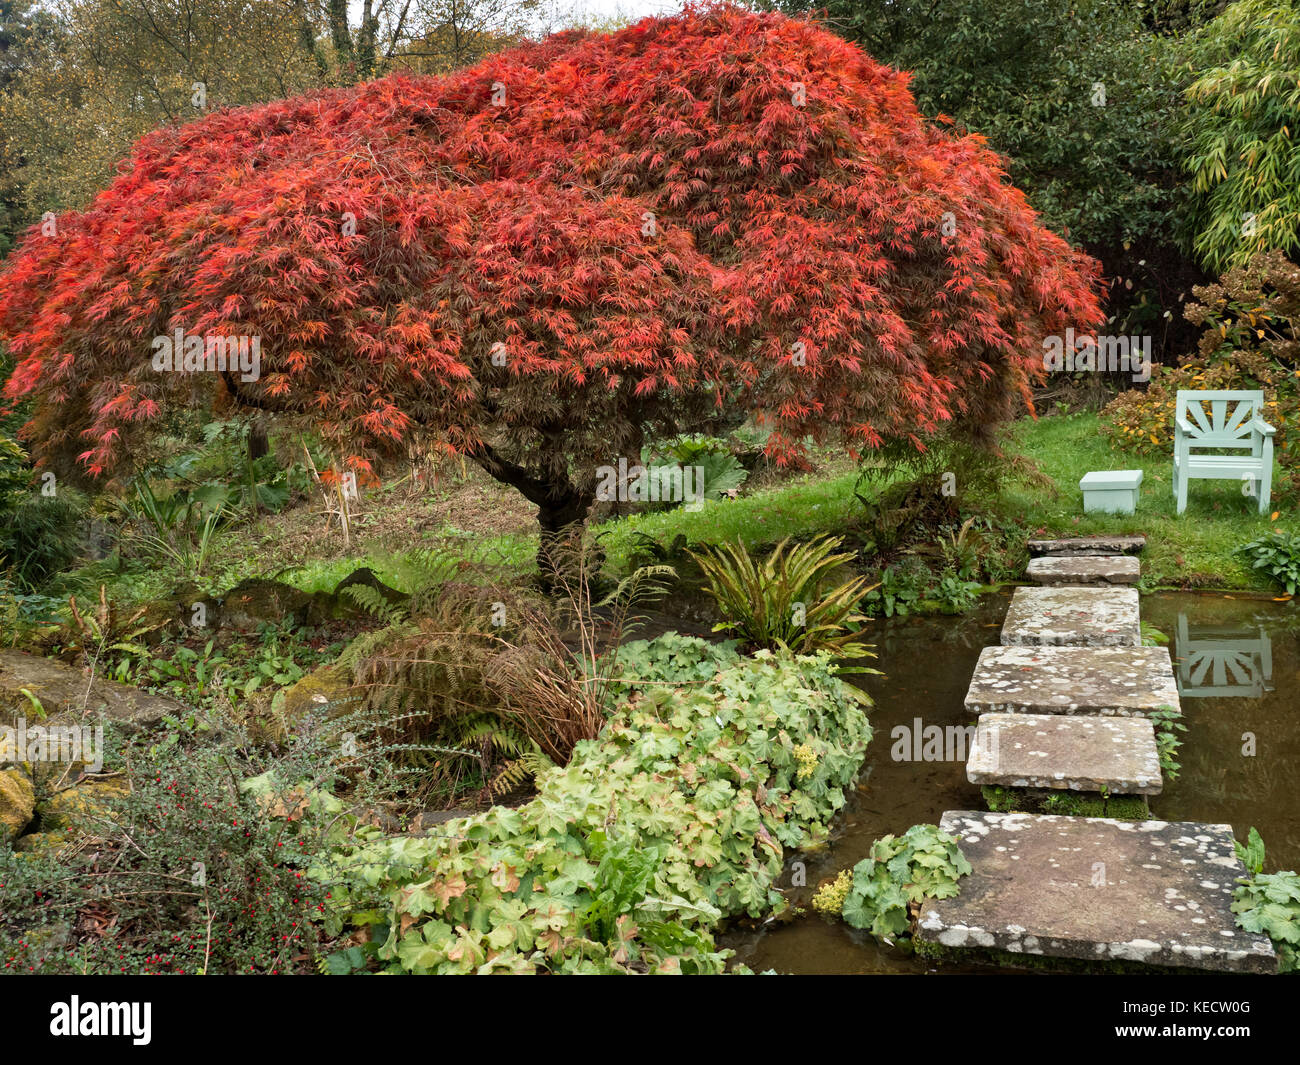 Acer tree in a garden in Autunm Stock Photo